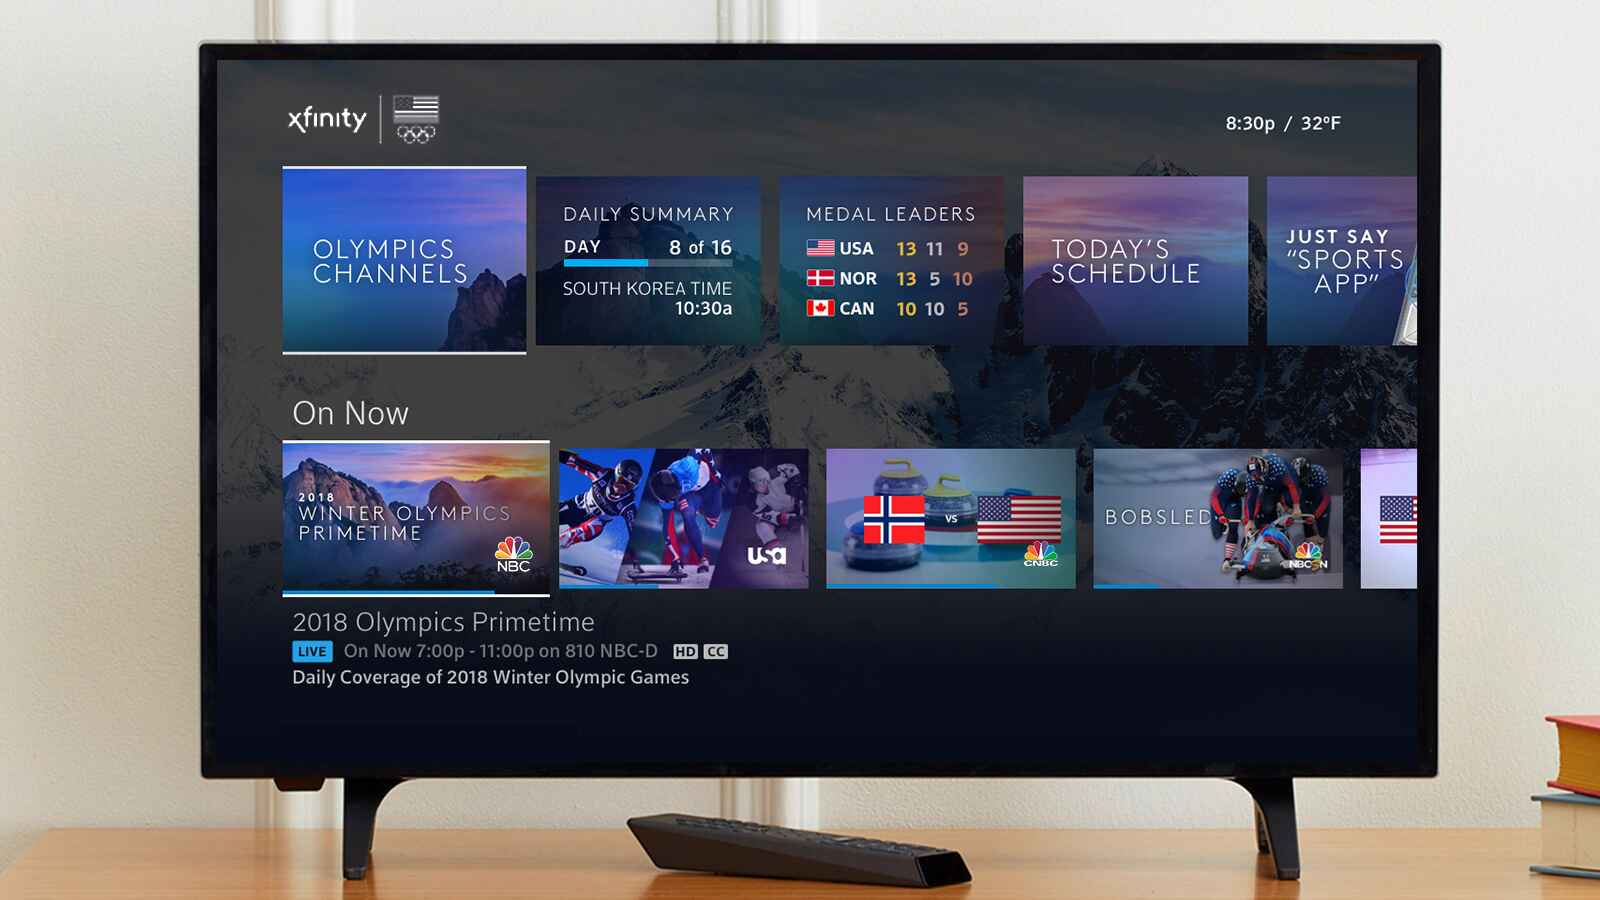 How To Get Xfinity App On Smart TV